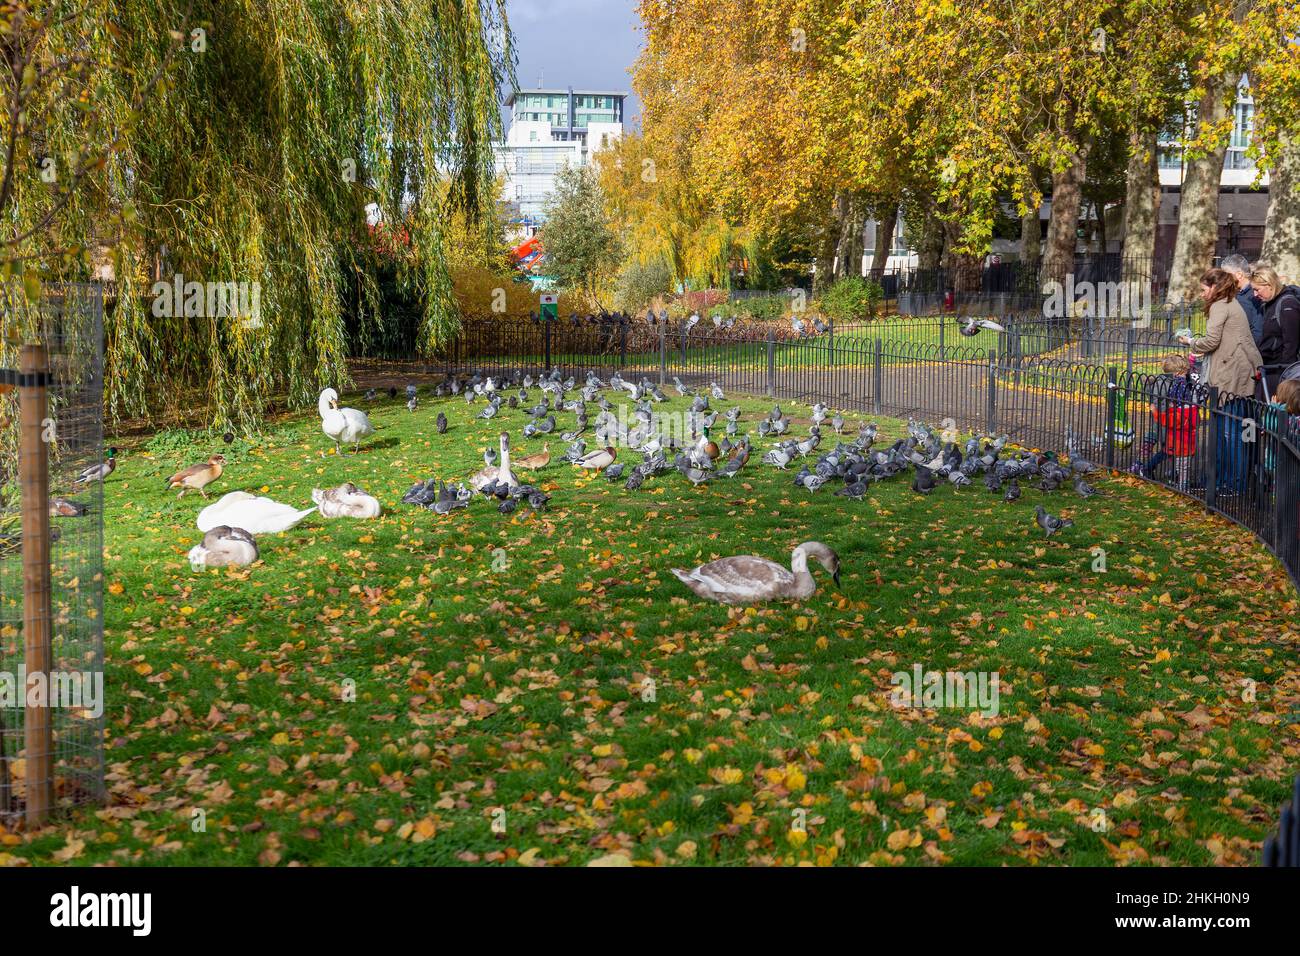 Swans, ducks, geese and pigeons in King George's Park, Wandsworth, London, England Stock Photo